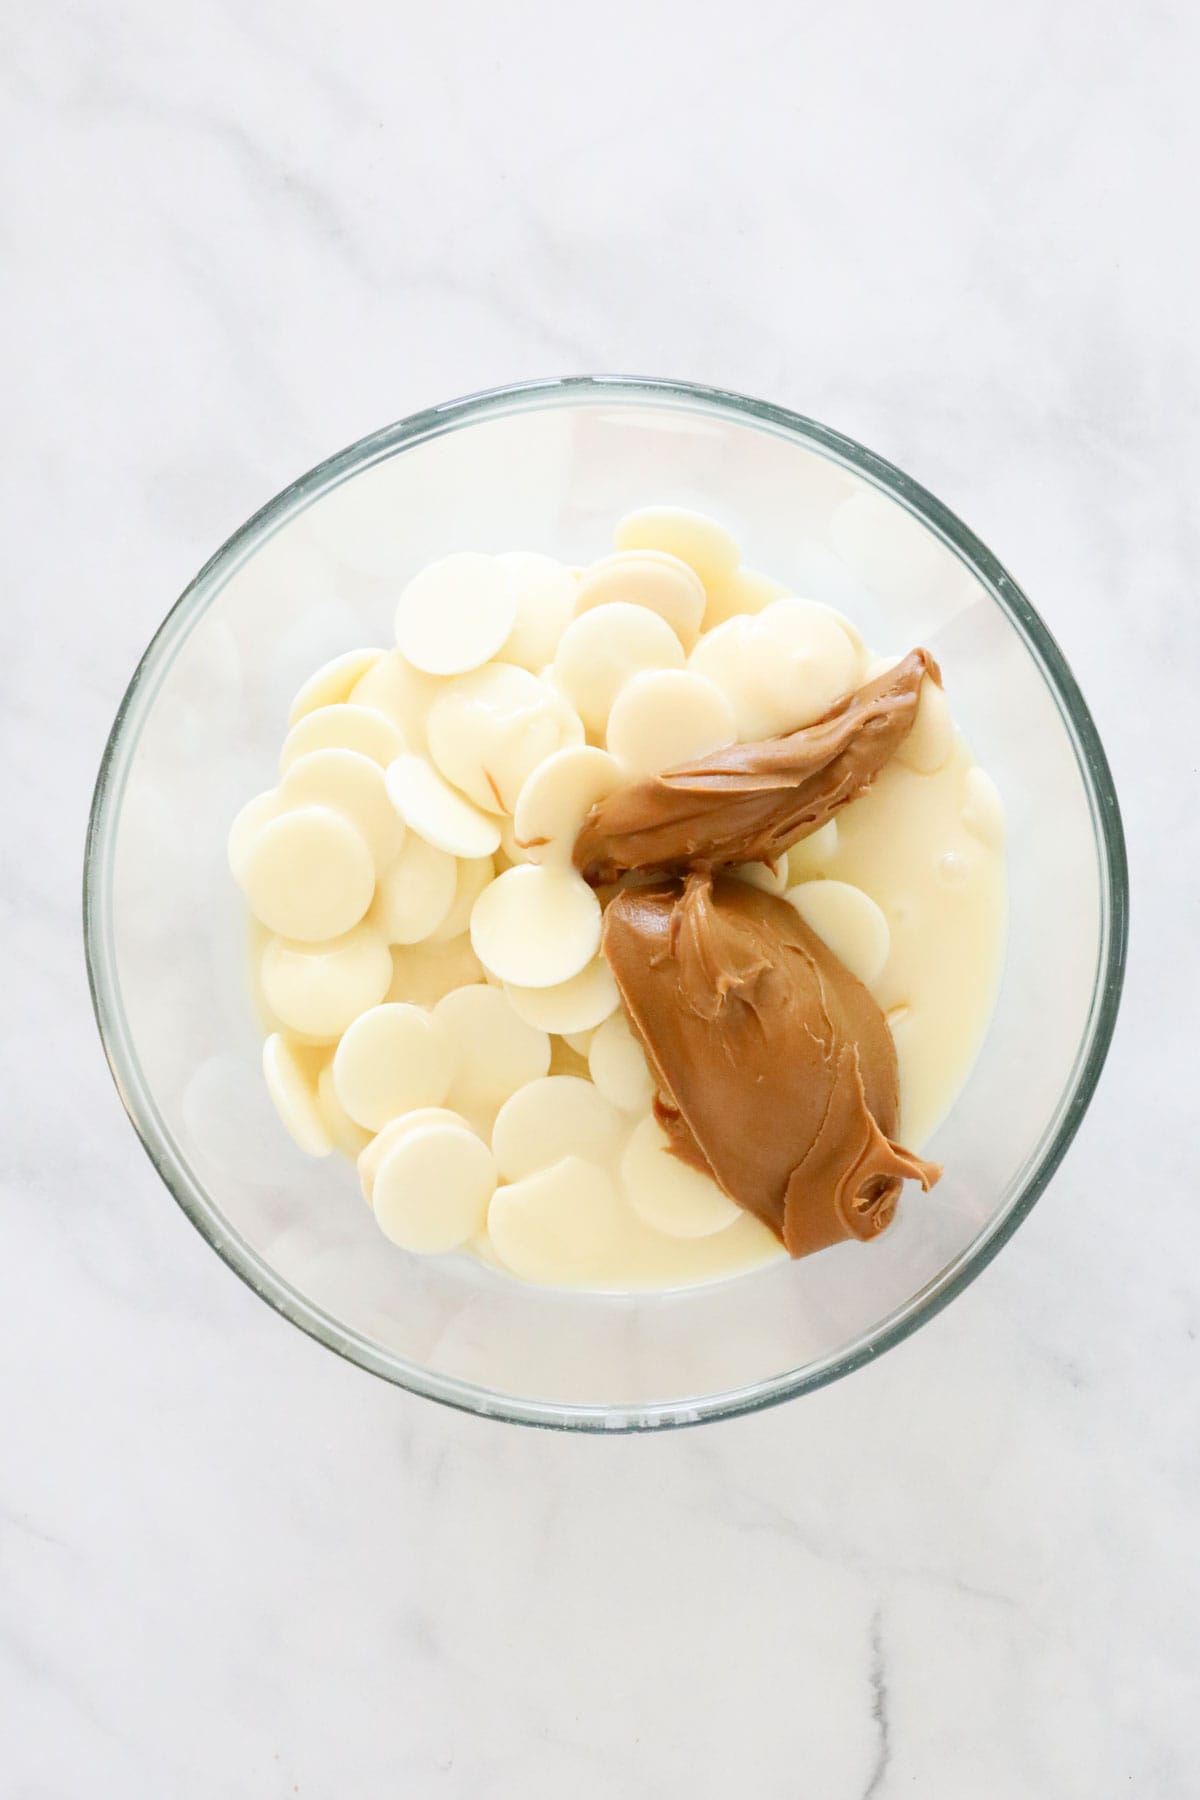 White chocolate melts, condensed milk and cookie butter in a mixing bowl.